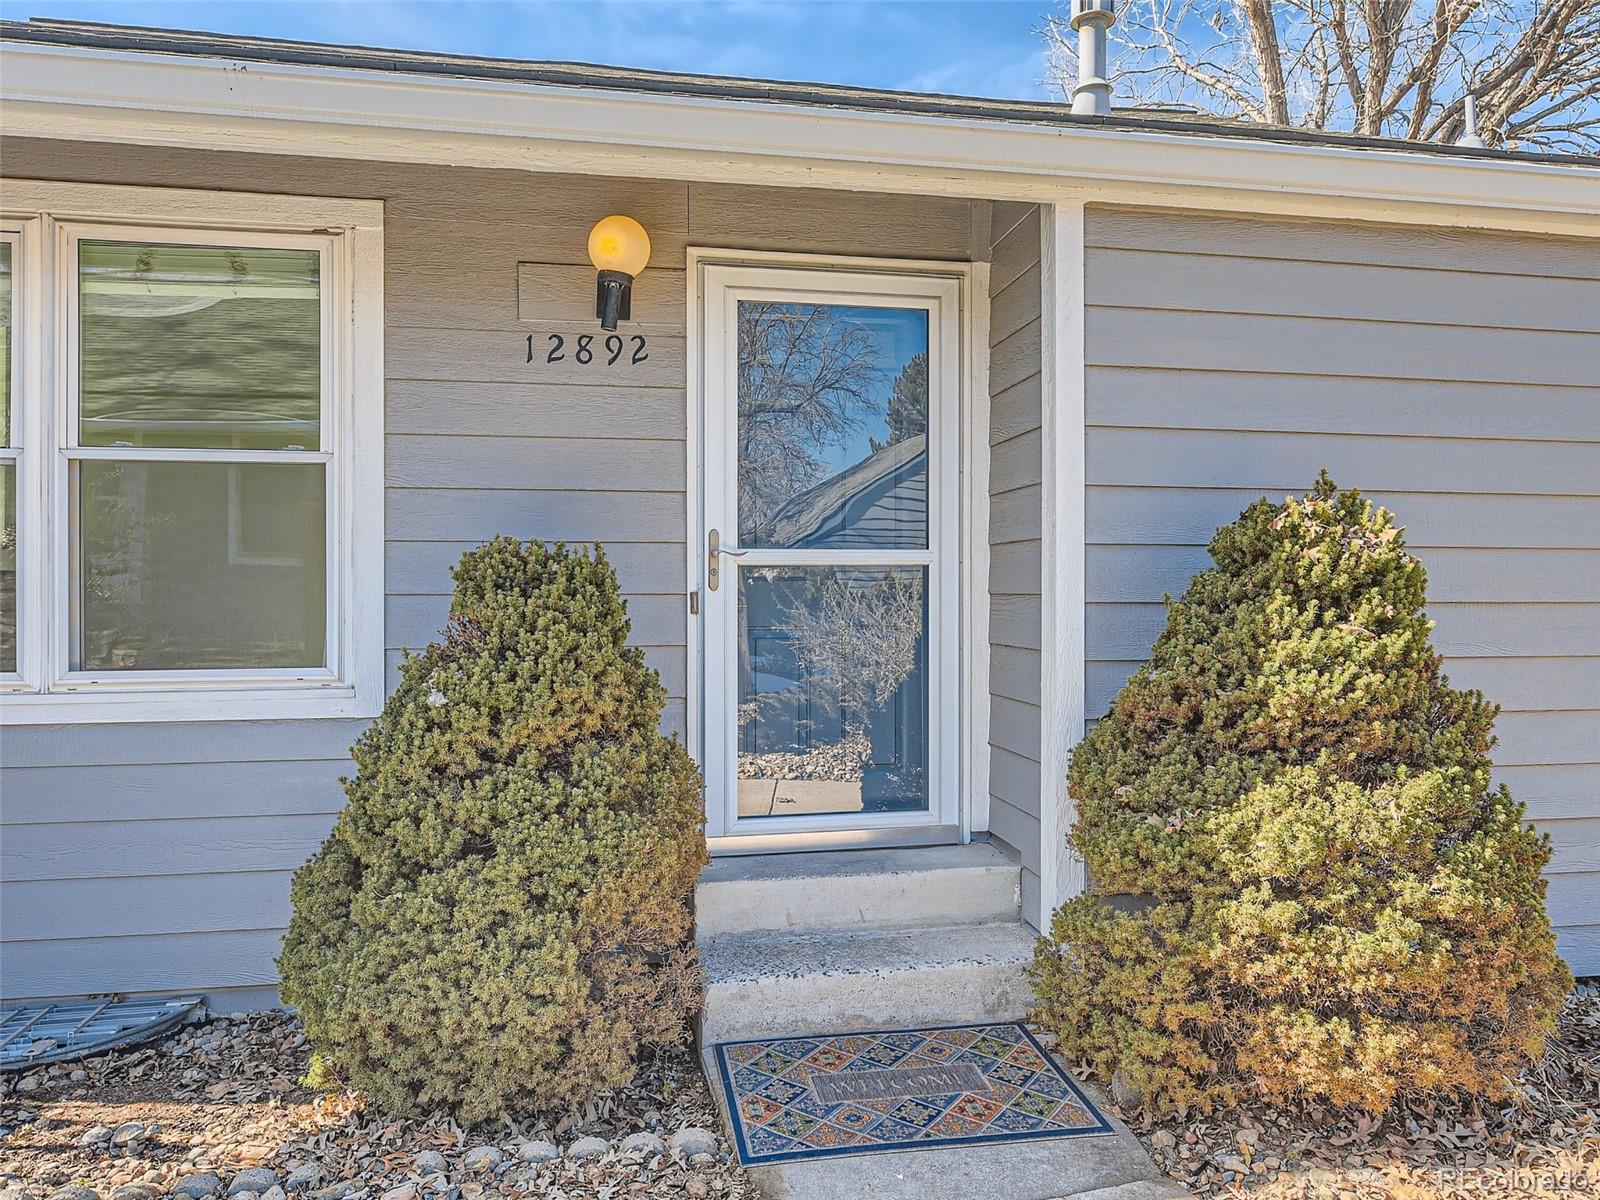 12892 e bethany place, aurora sold home. Closed on 2024-03-22 for $425,000.